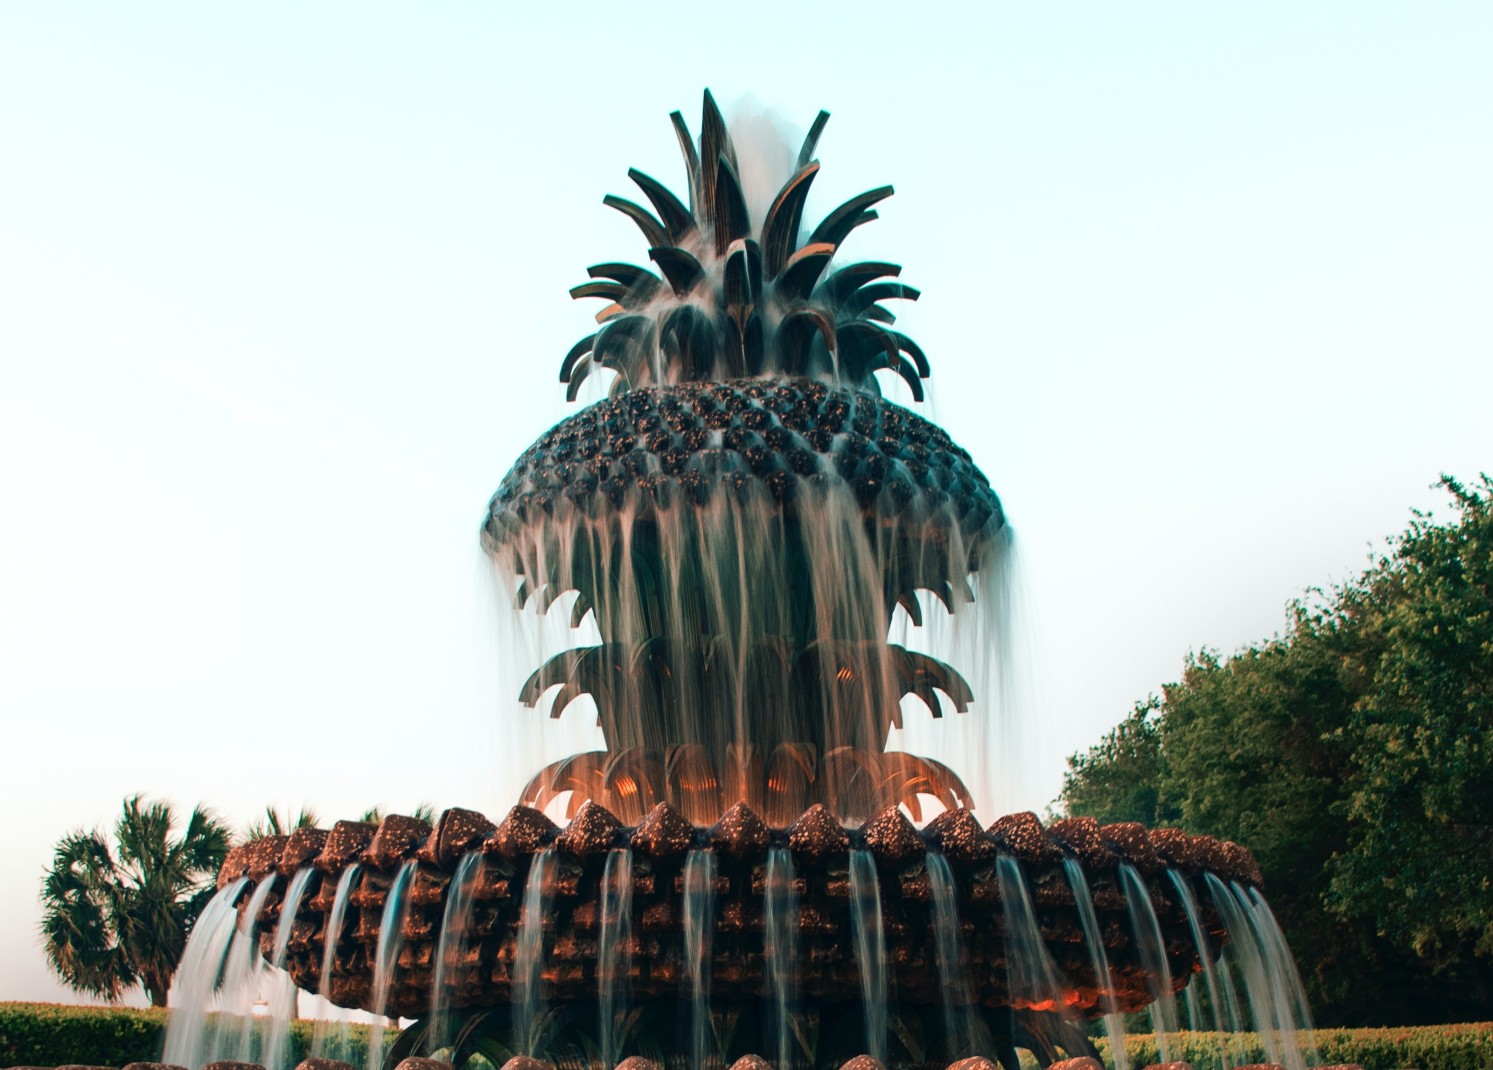 Pineapple shaped fountain during daytime